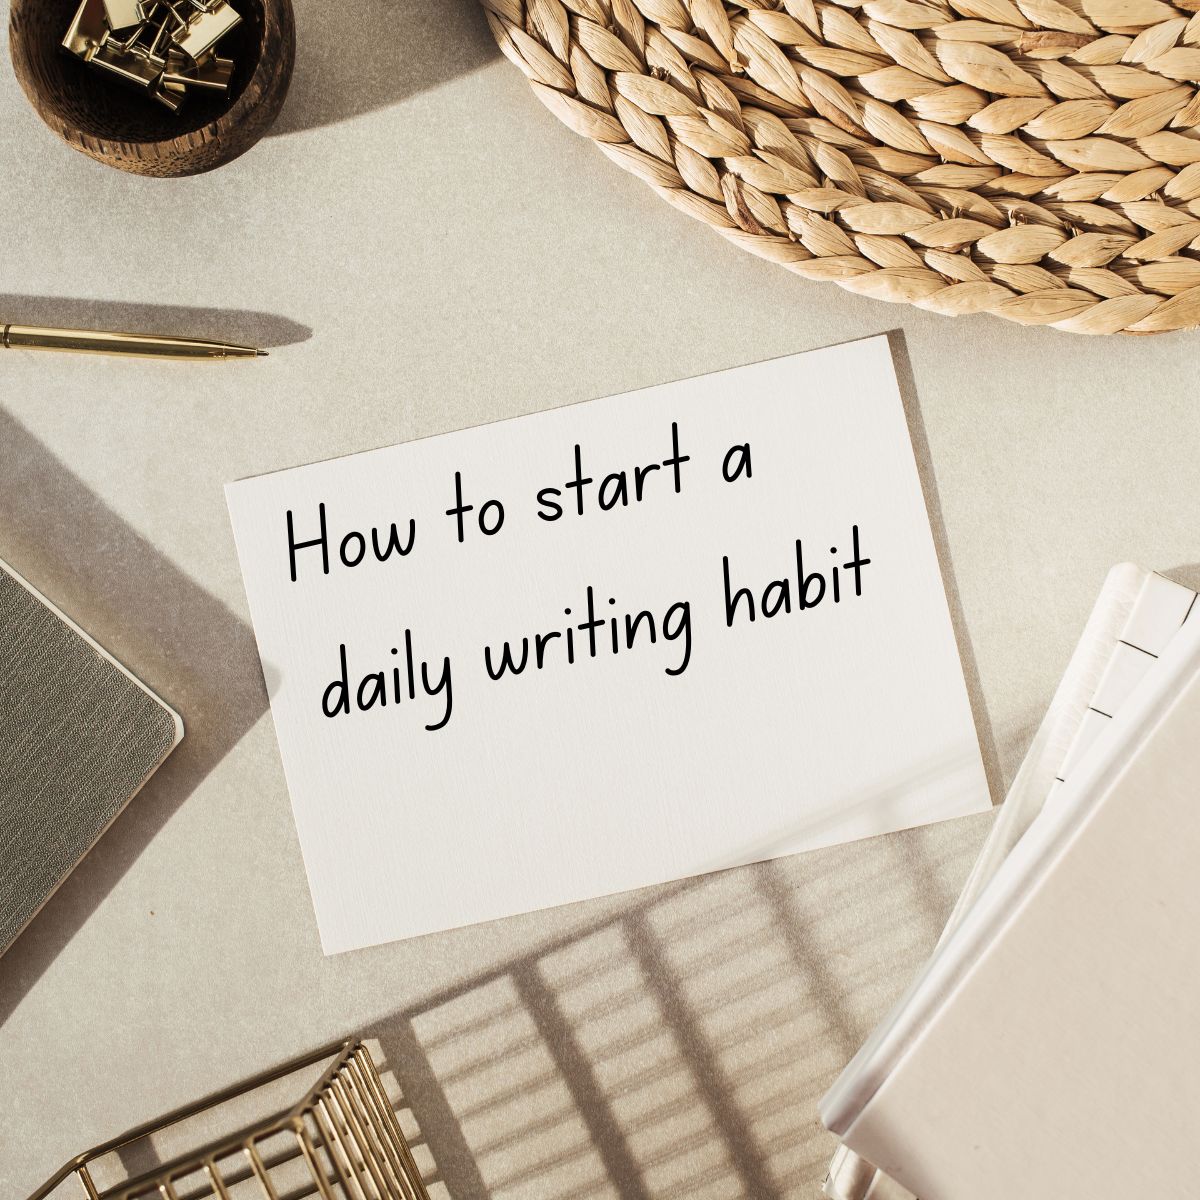 How to start a daily writing habit